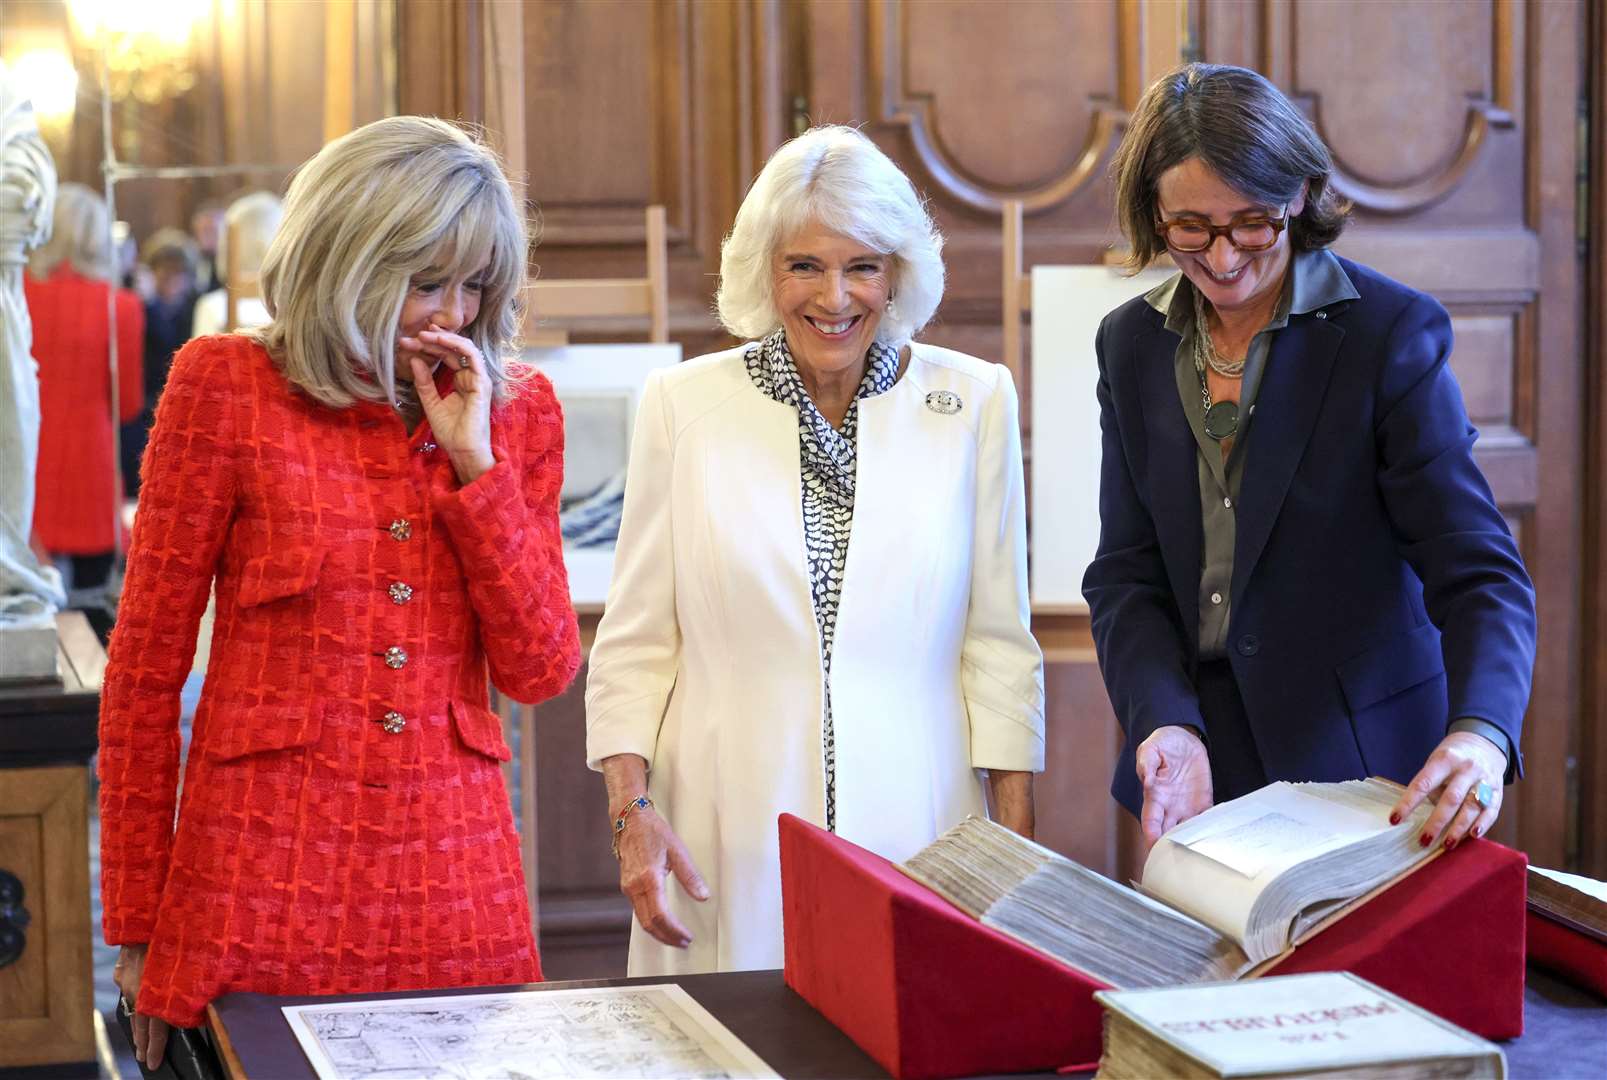 Brigitte Macron and the Queen at the launch of a new UK-France literary prize at the Bibliotheque Nationale de France in Paris (Chris Jackson/PA)